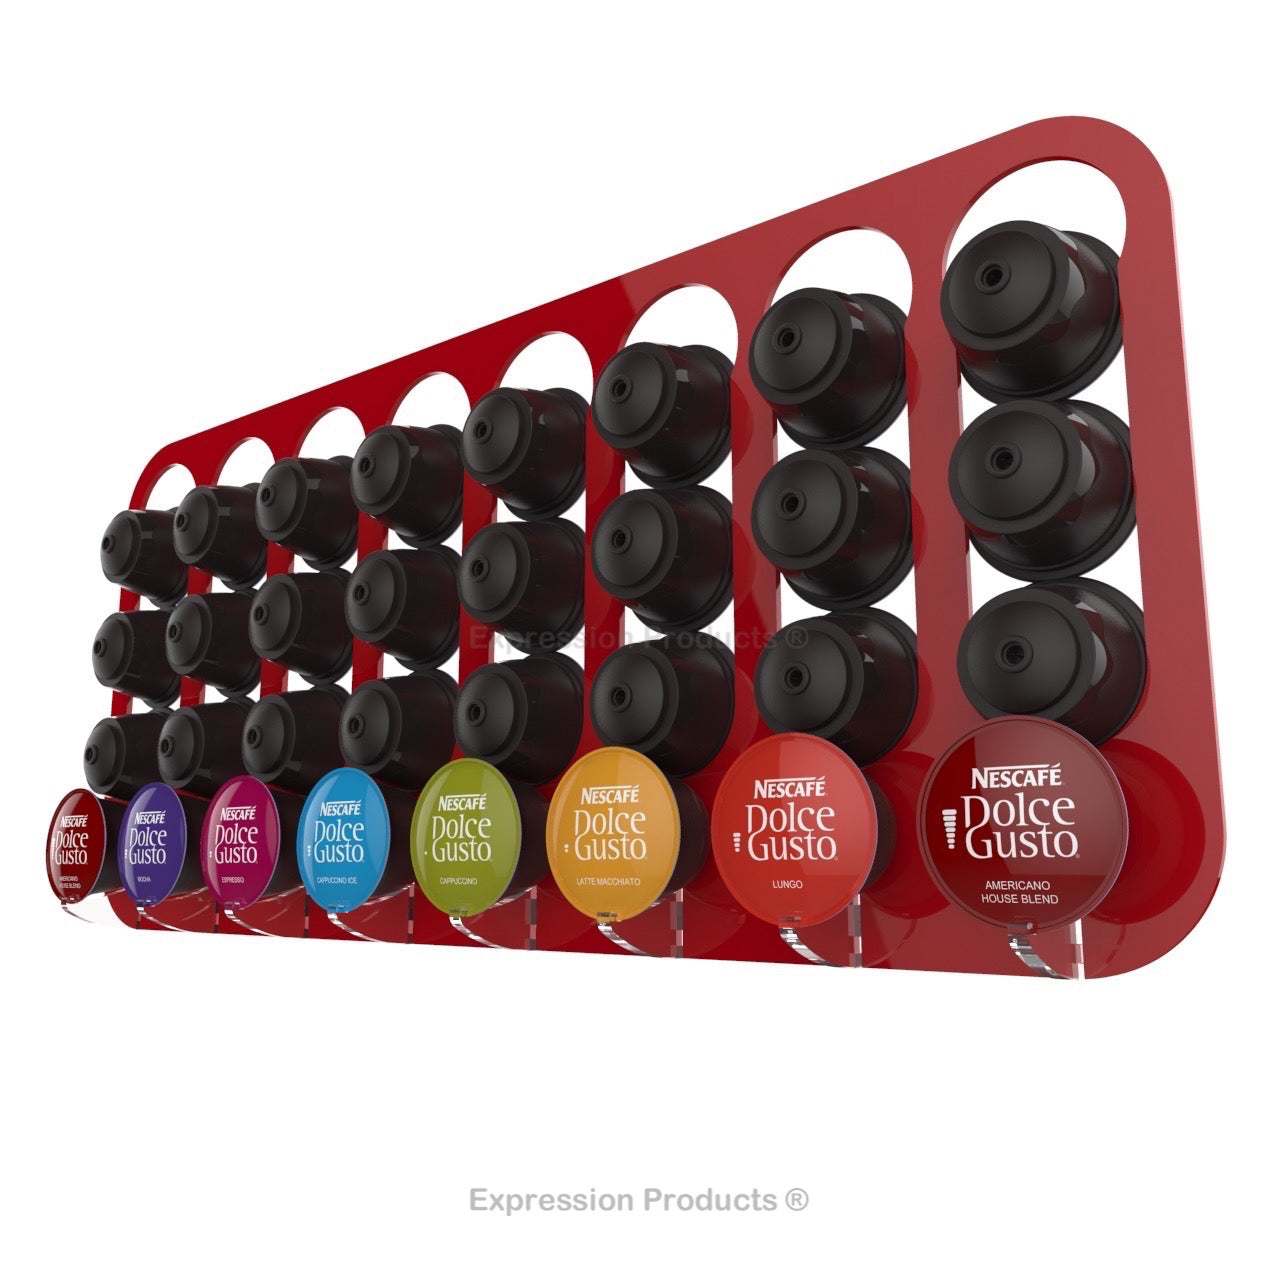 Dolce gusto coffee pod holder, wall mounted, half height.  Shown in red holding 32 pods